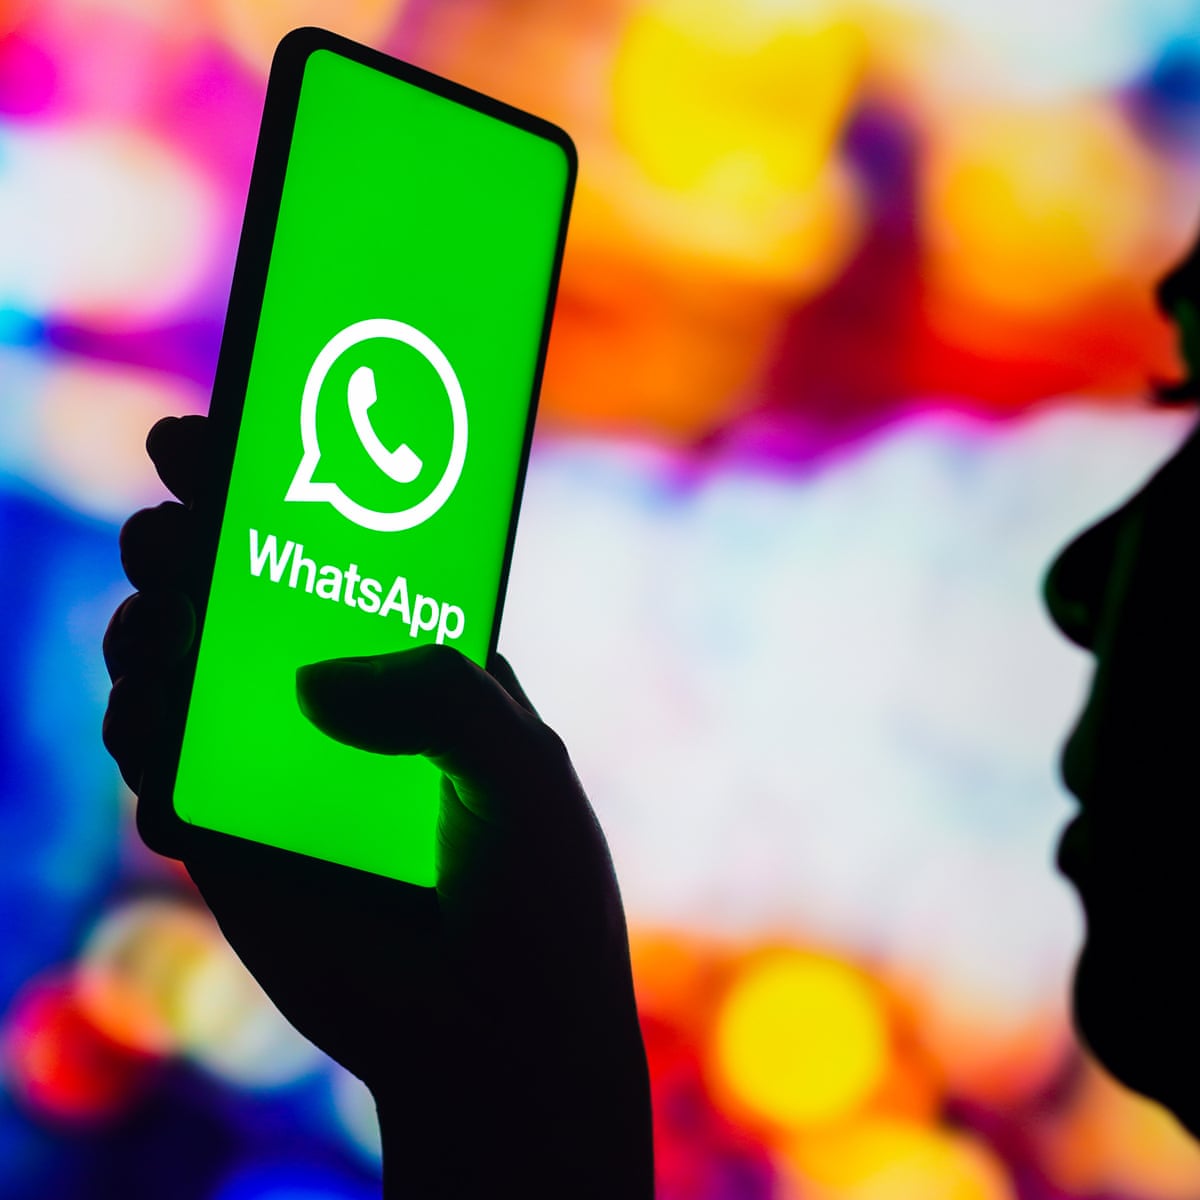 Your sent WhatsApp messages will soon be editable.